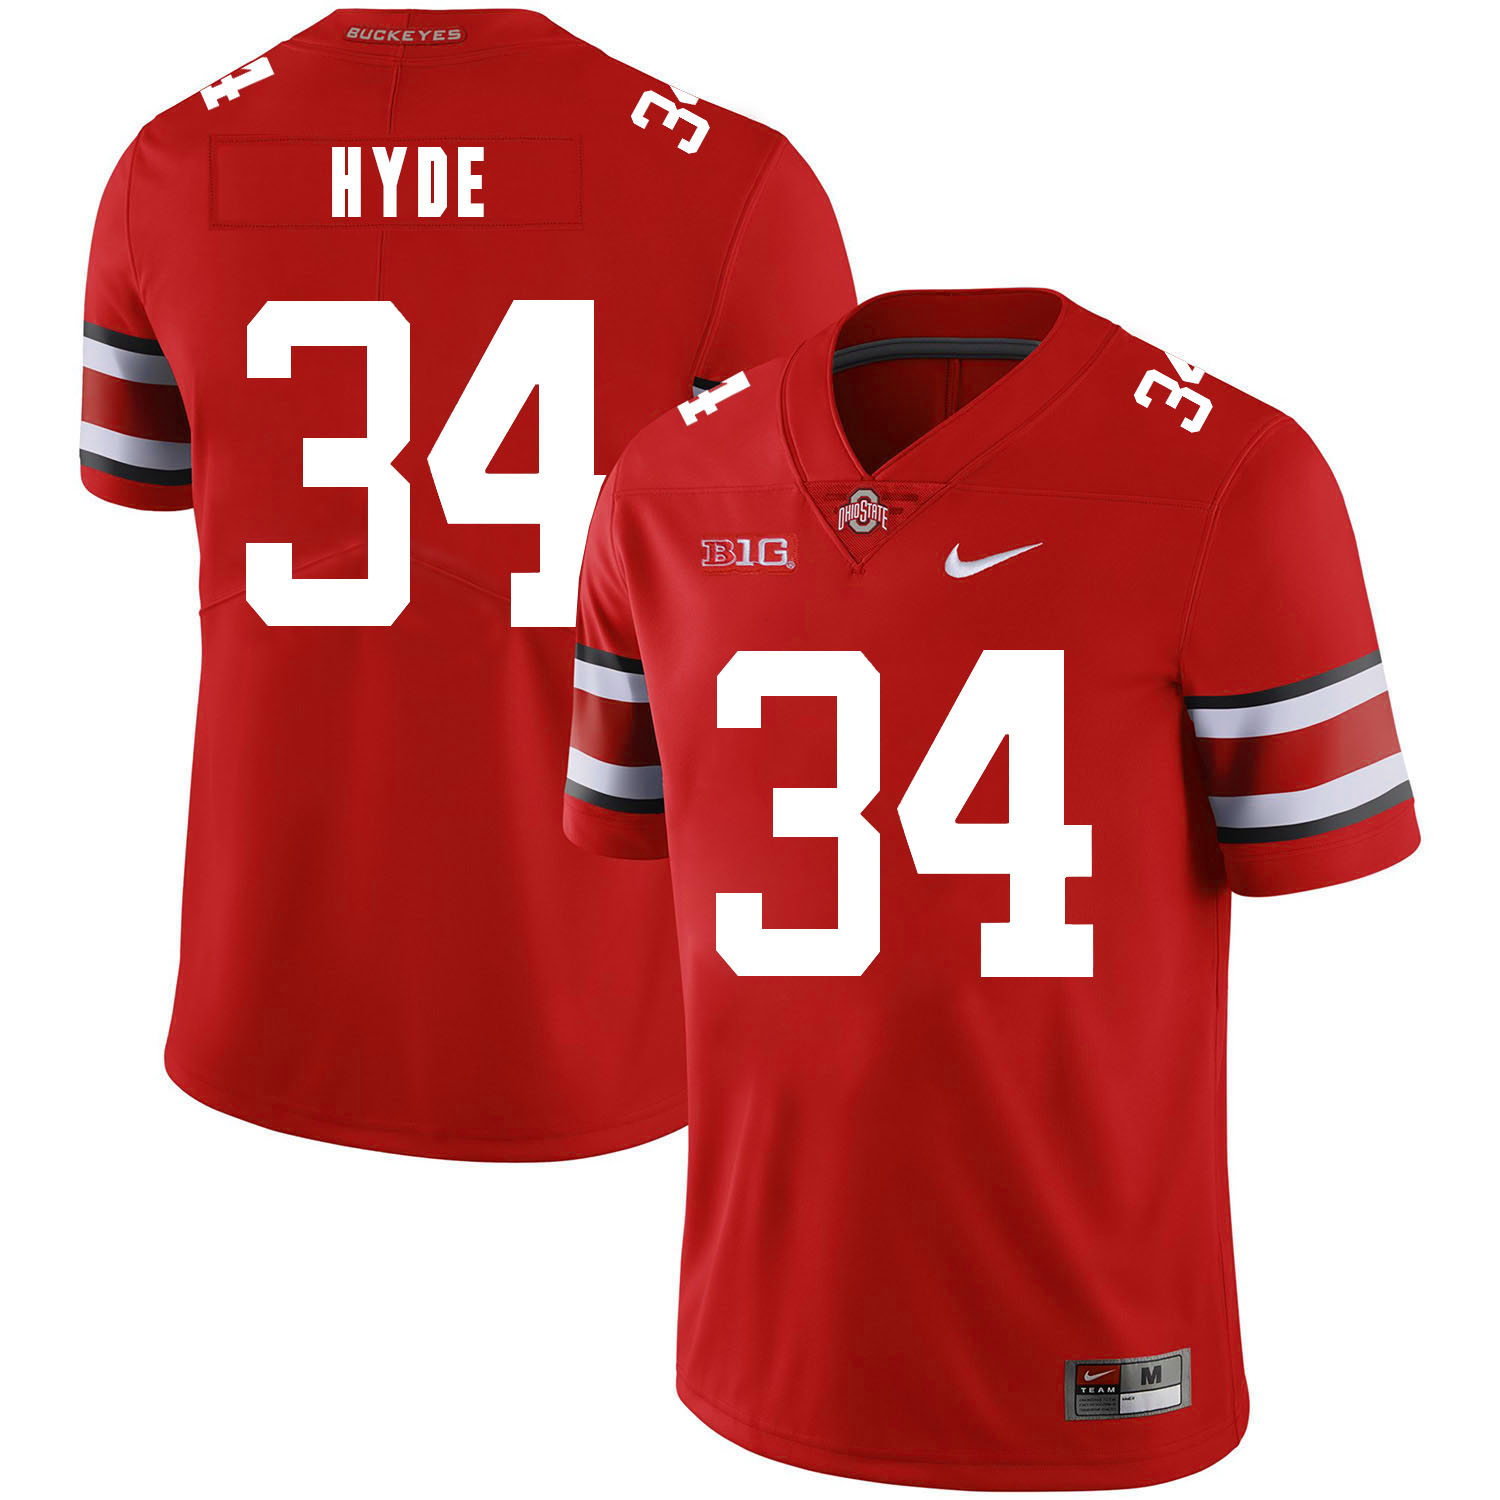 Ohio State Buckeyes 34 Carlos Hyde Red Nike College Football Jersey